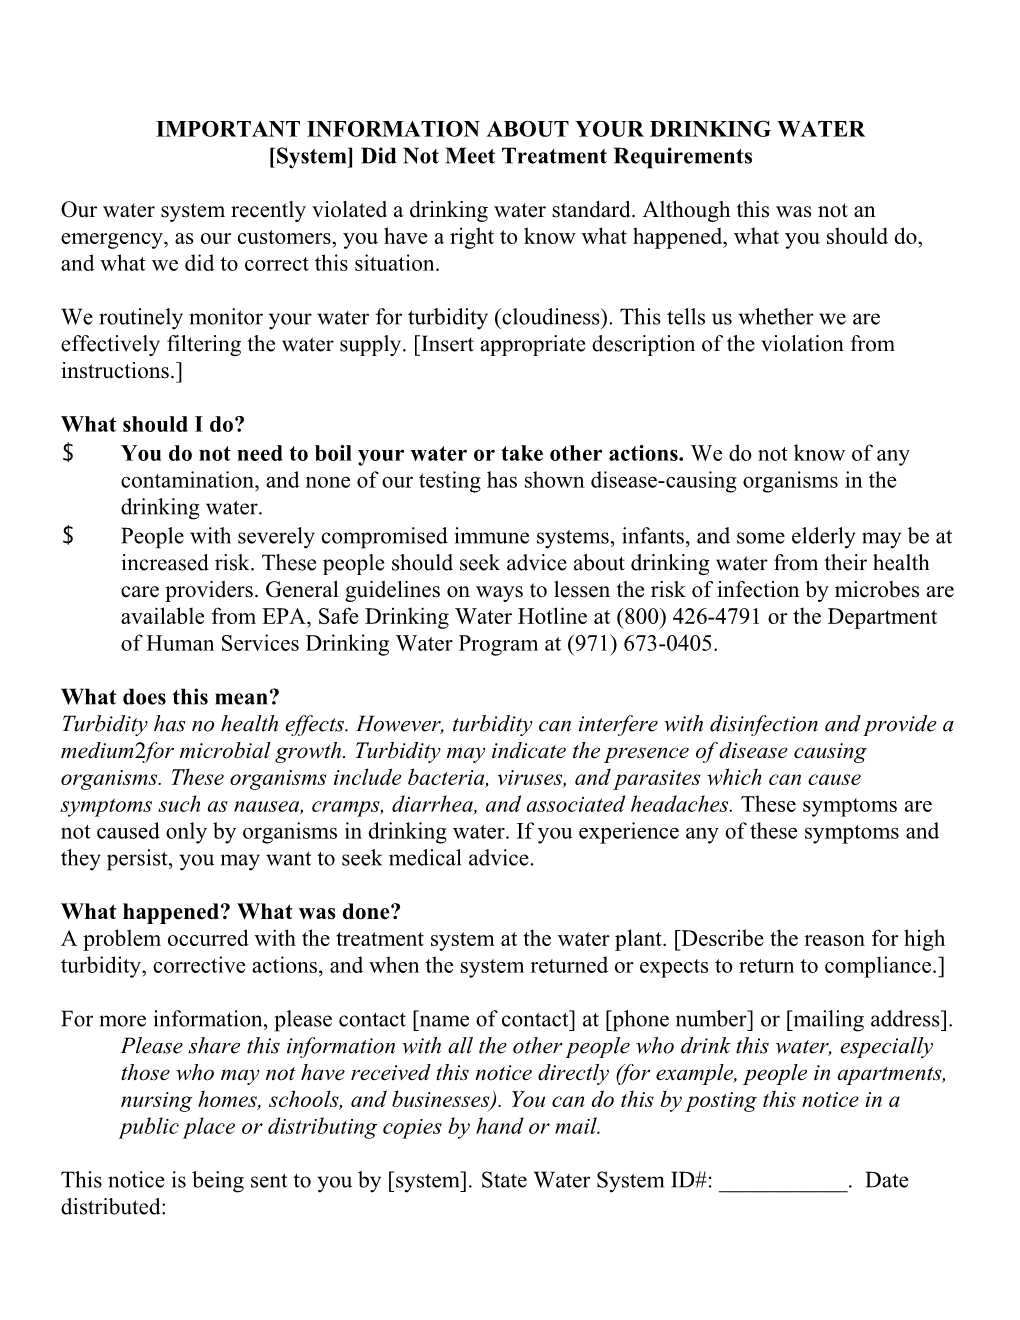 Instructions for SWTR Turbidity Exceedance Notice Template 2 6 s1